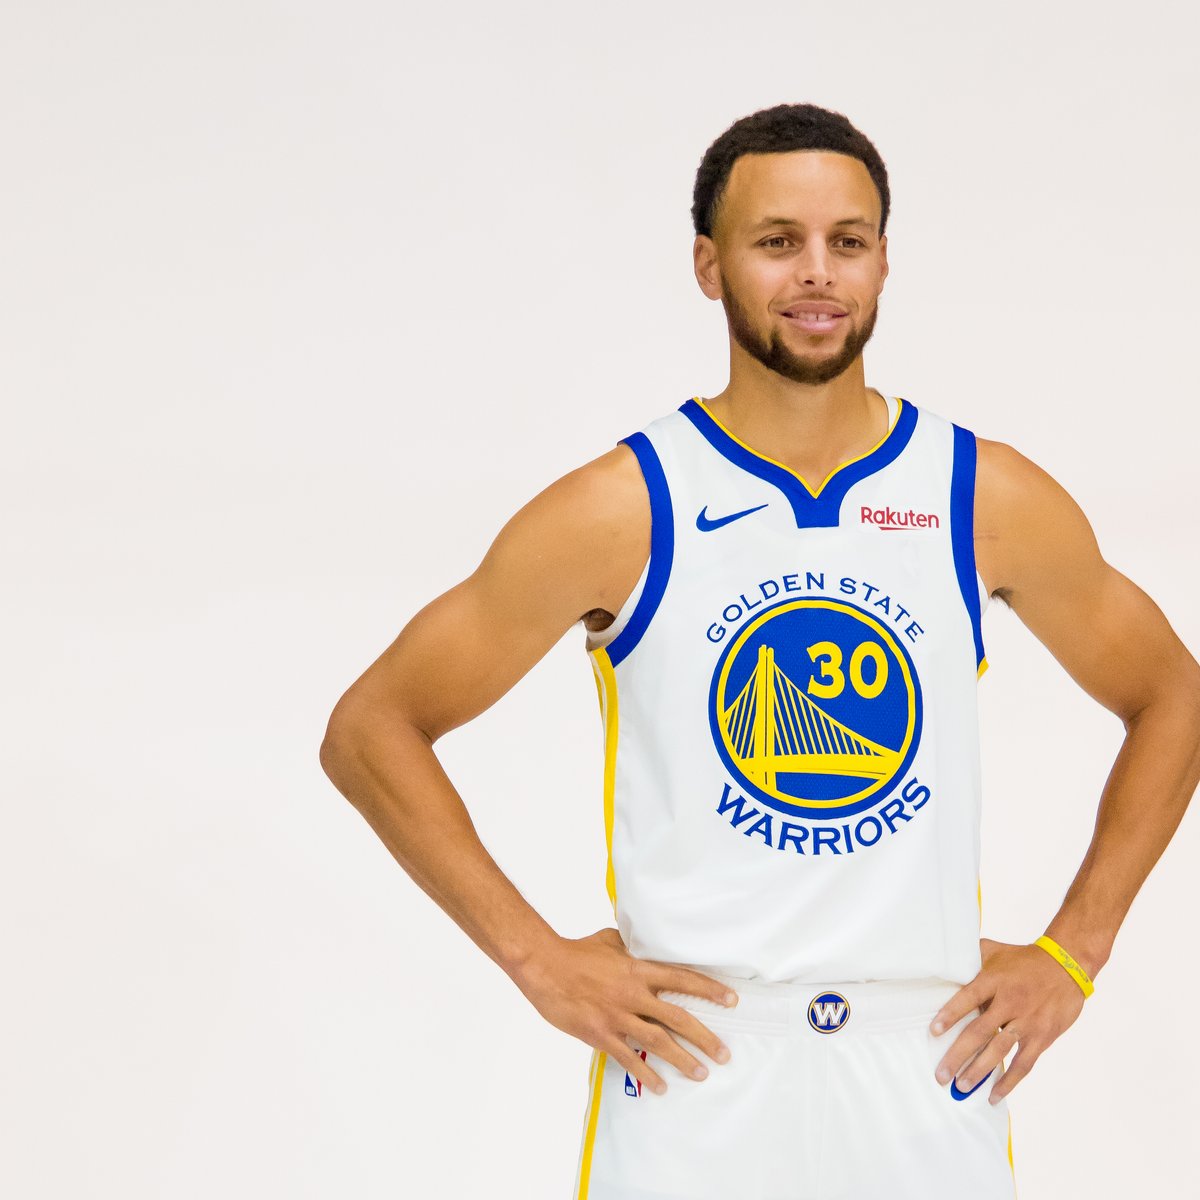 WATCH: Steph Curry practices while wearing sleeve on arm